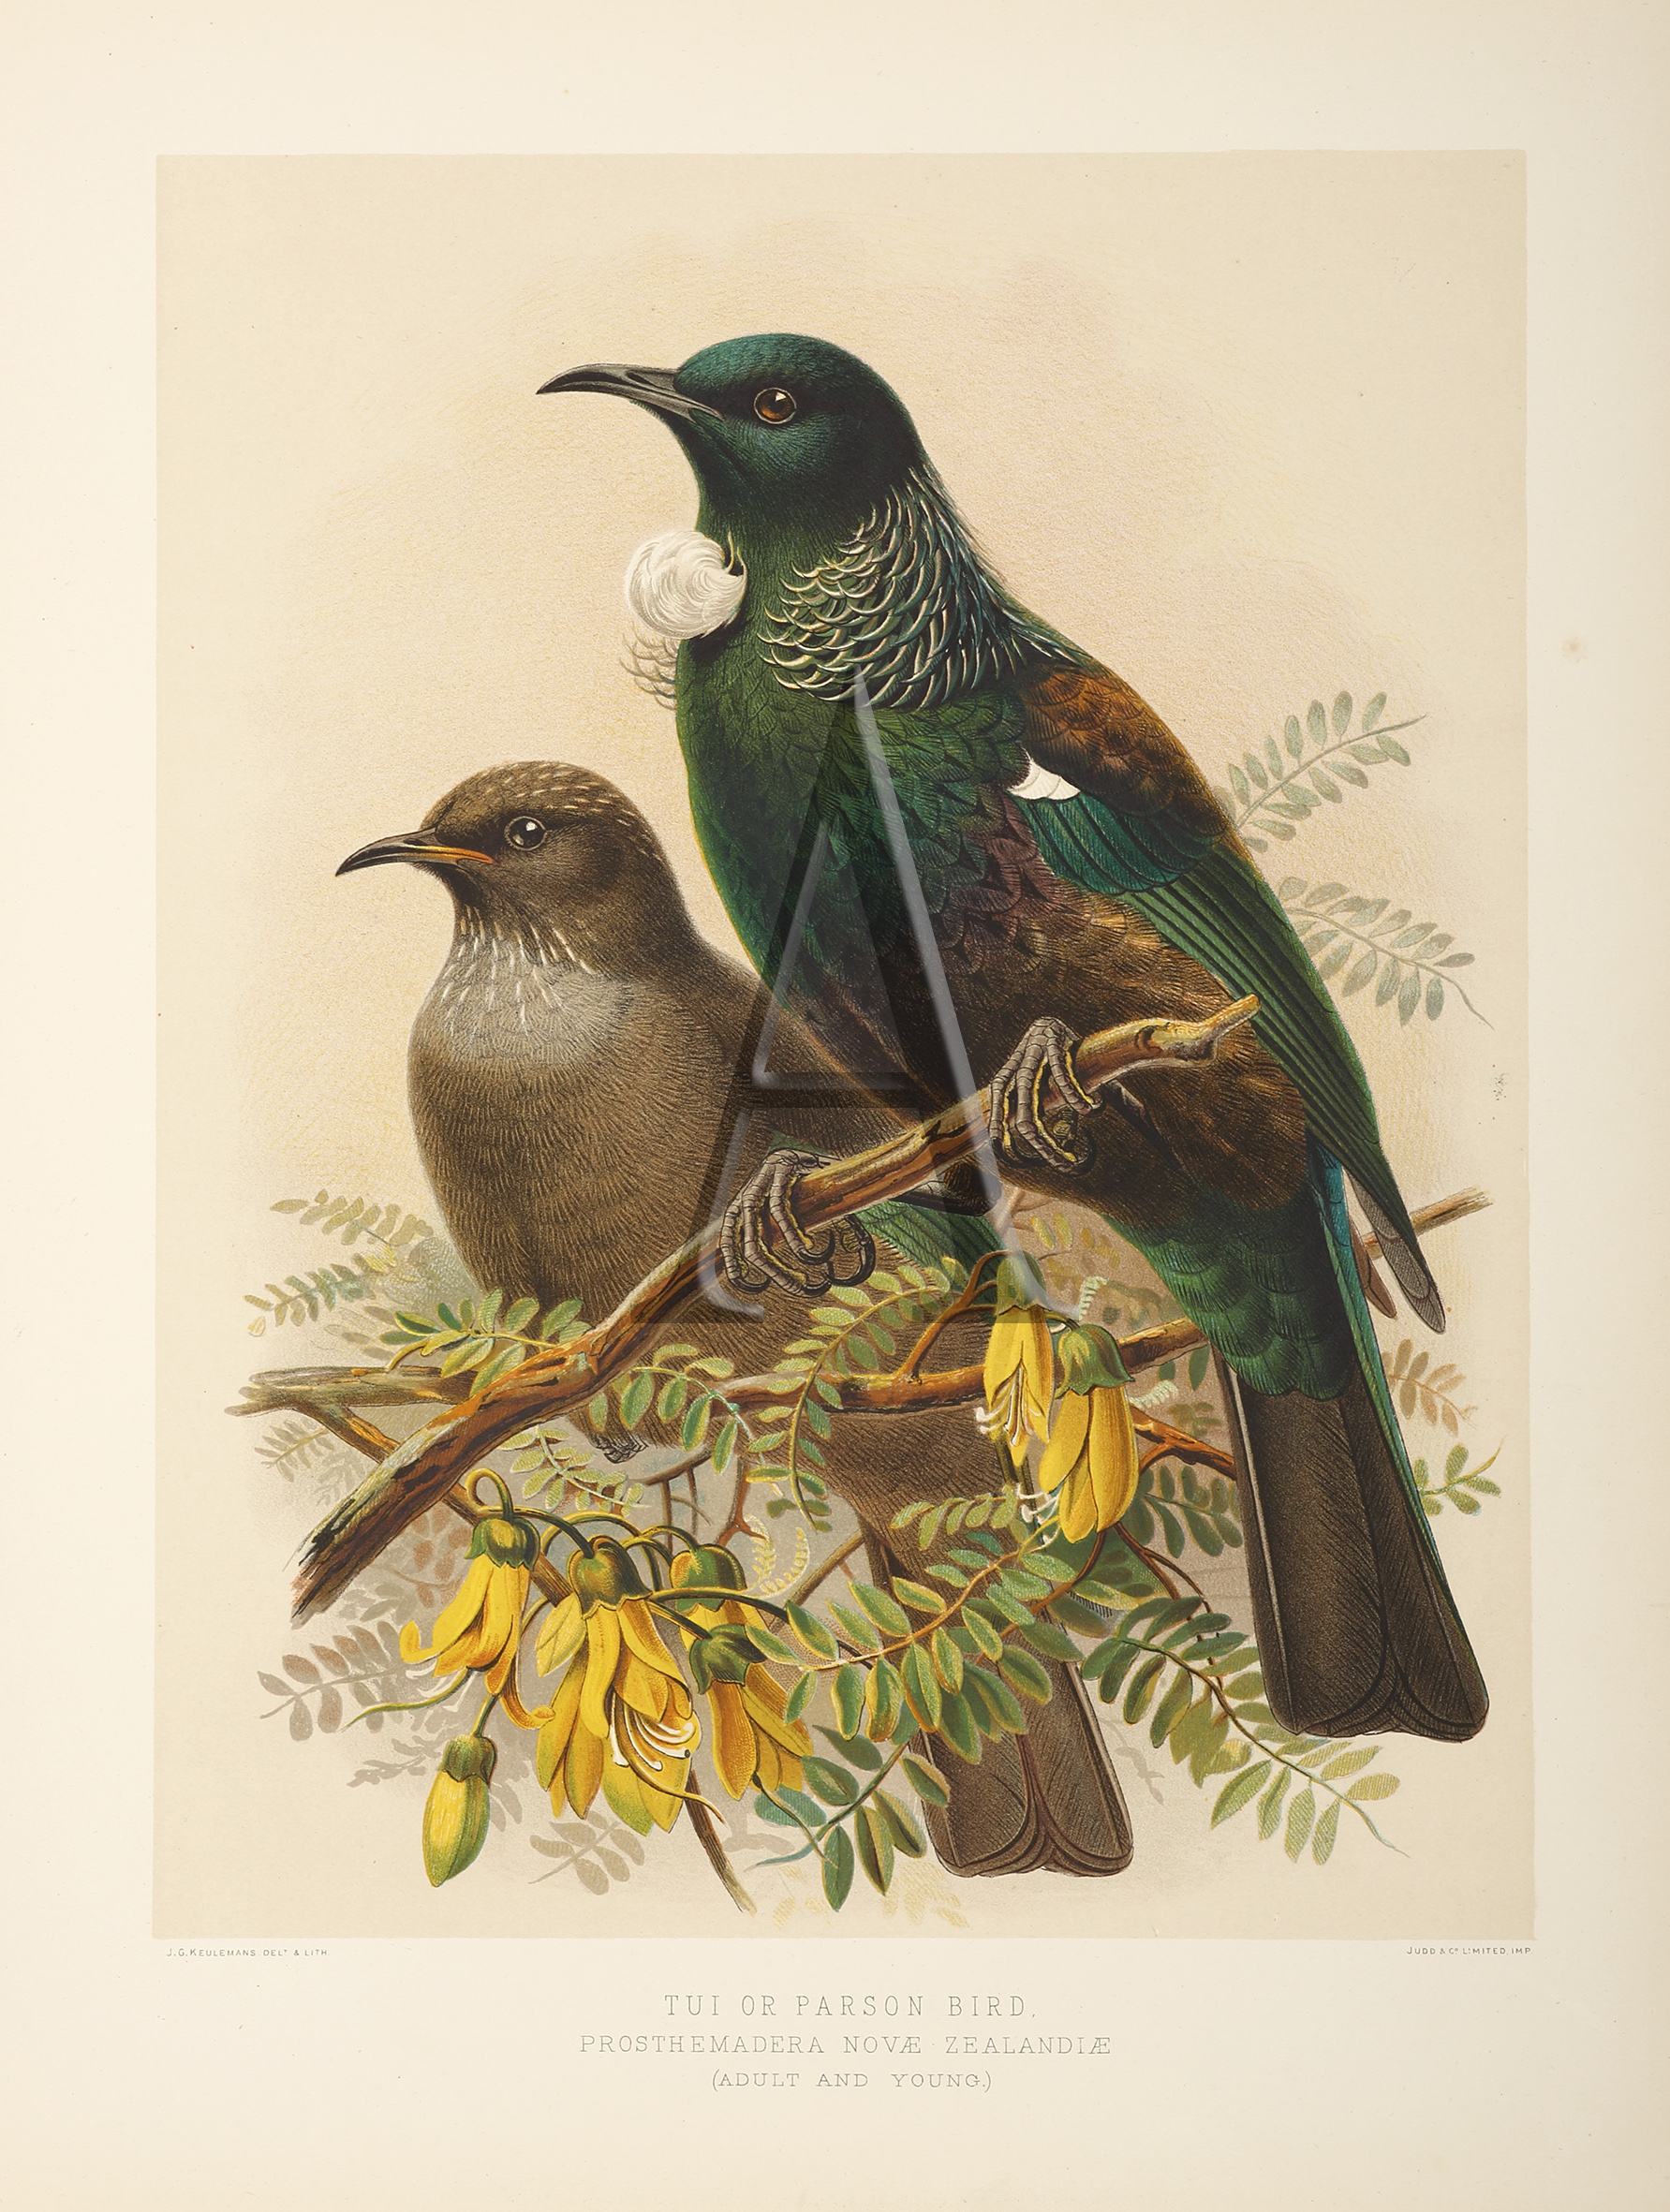 Tui or Parson Bird - Antique Print from 1888